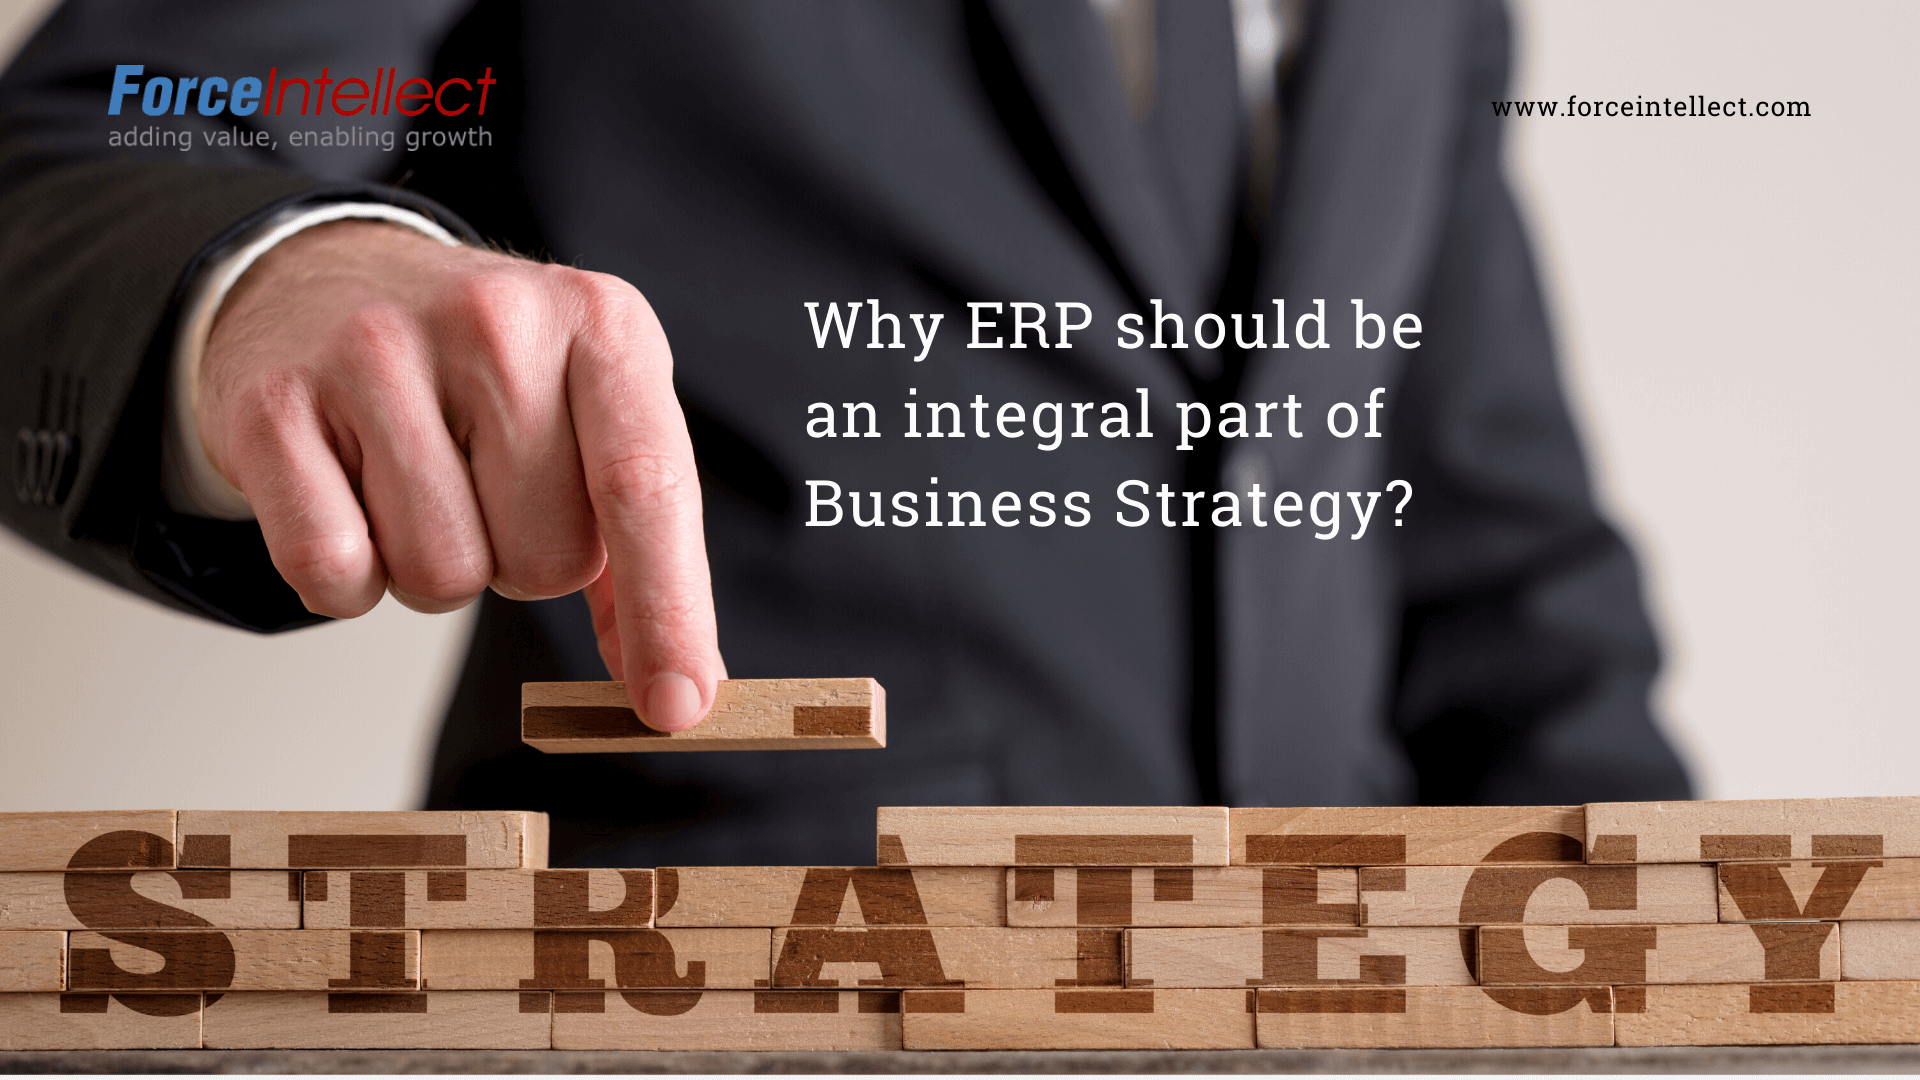 Business Strategy ERP alignment